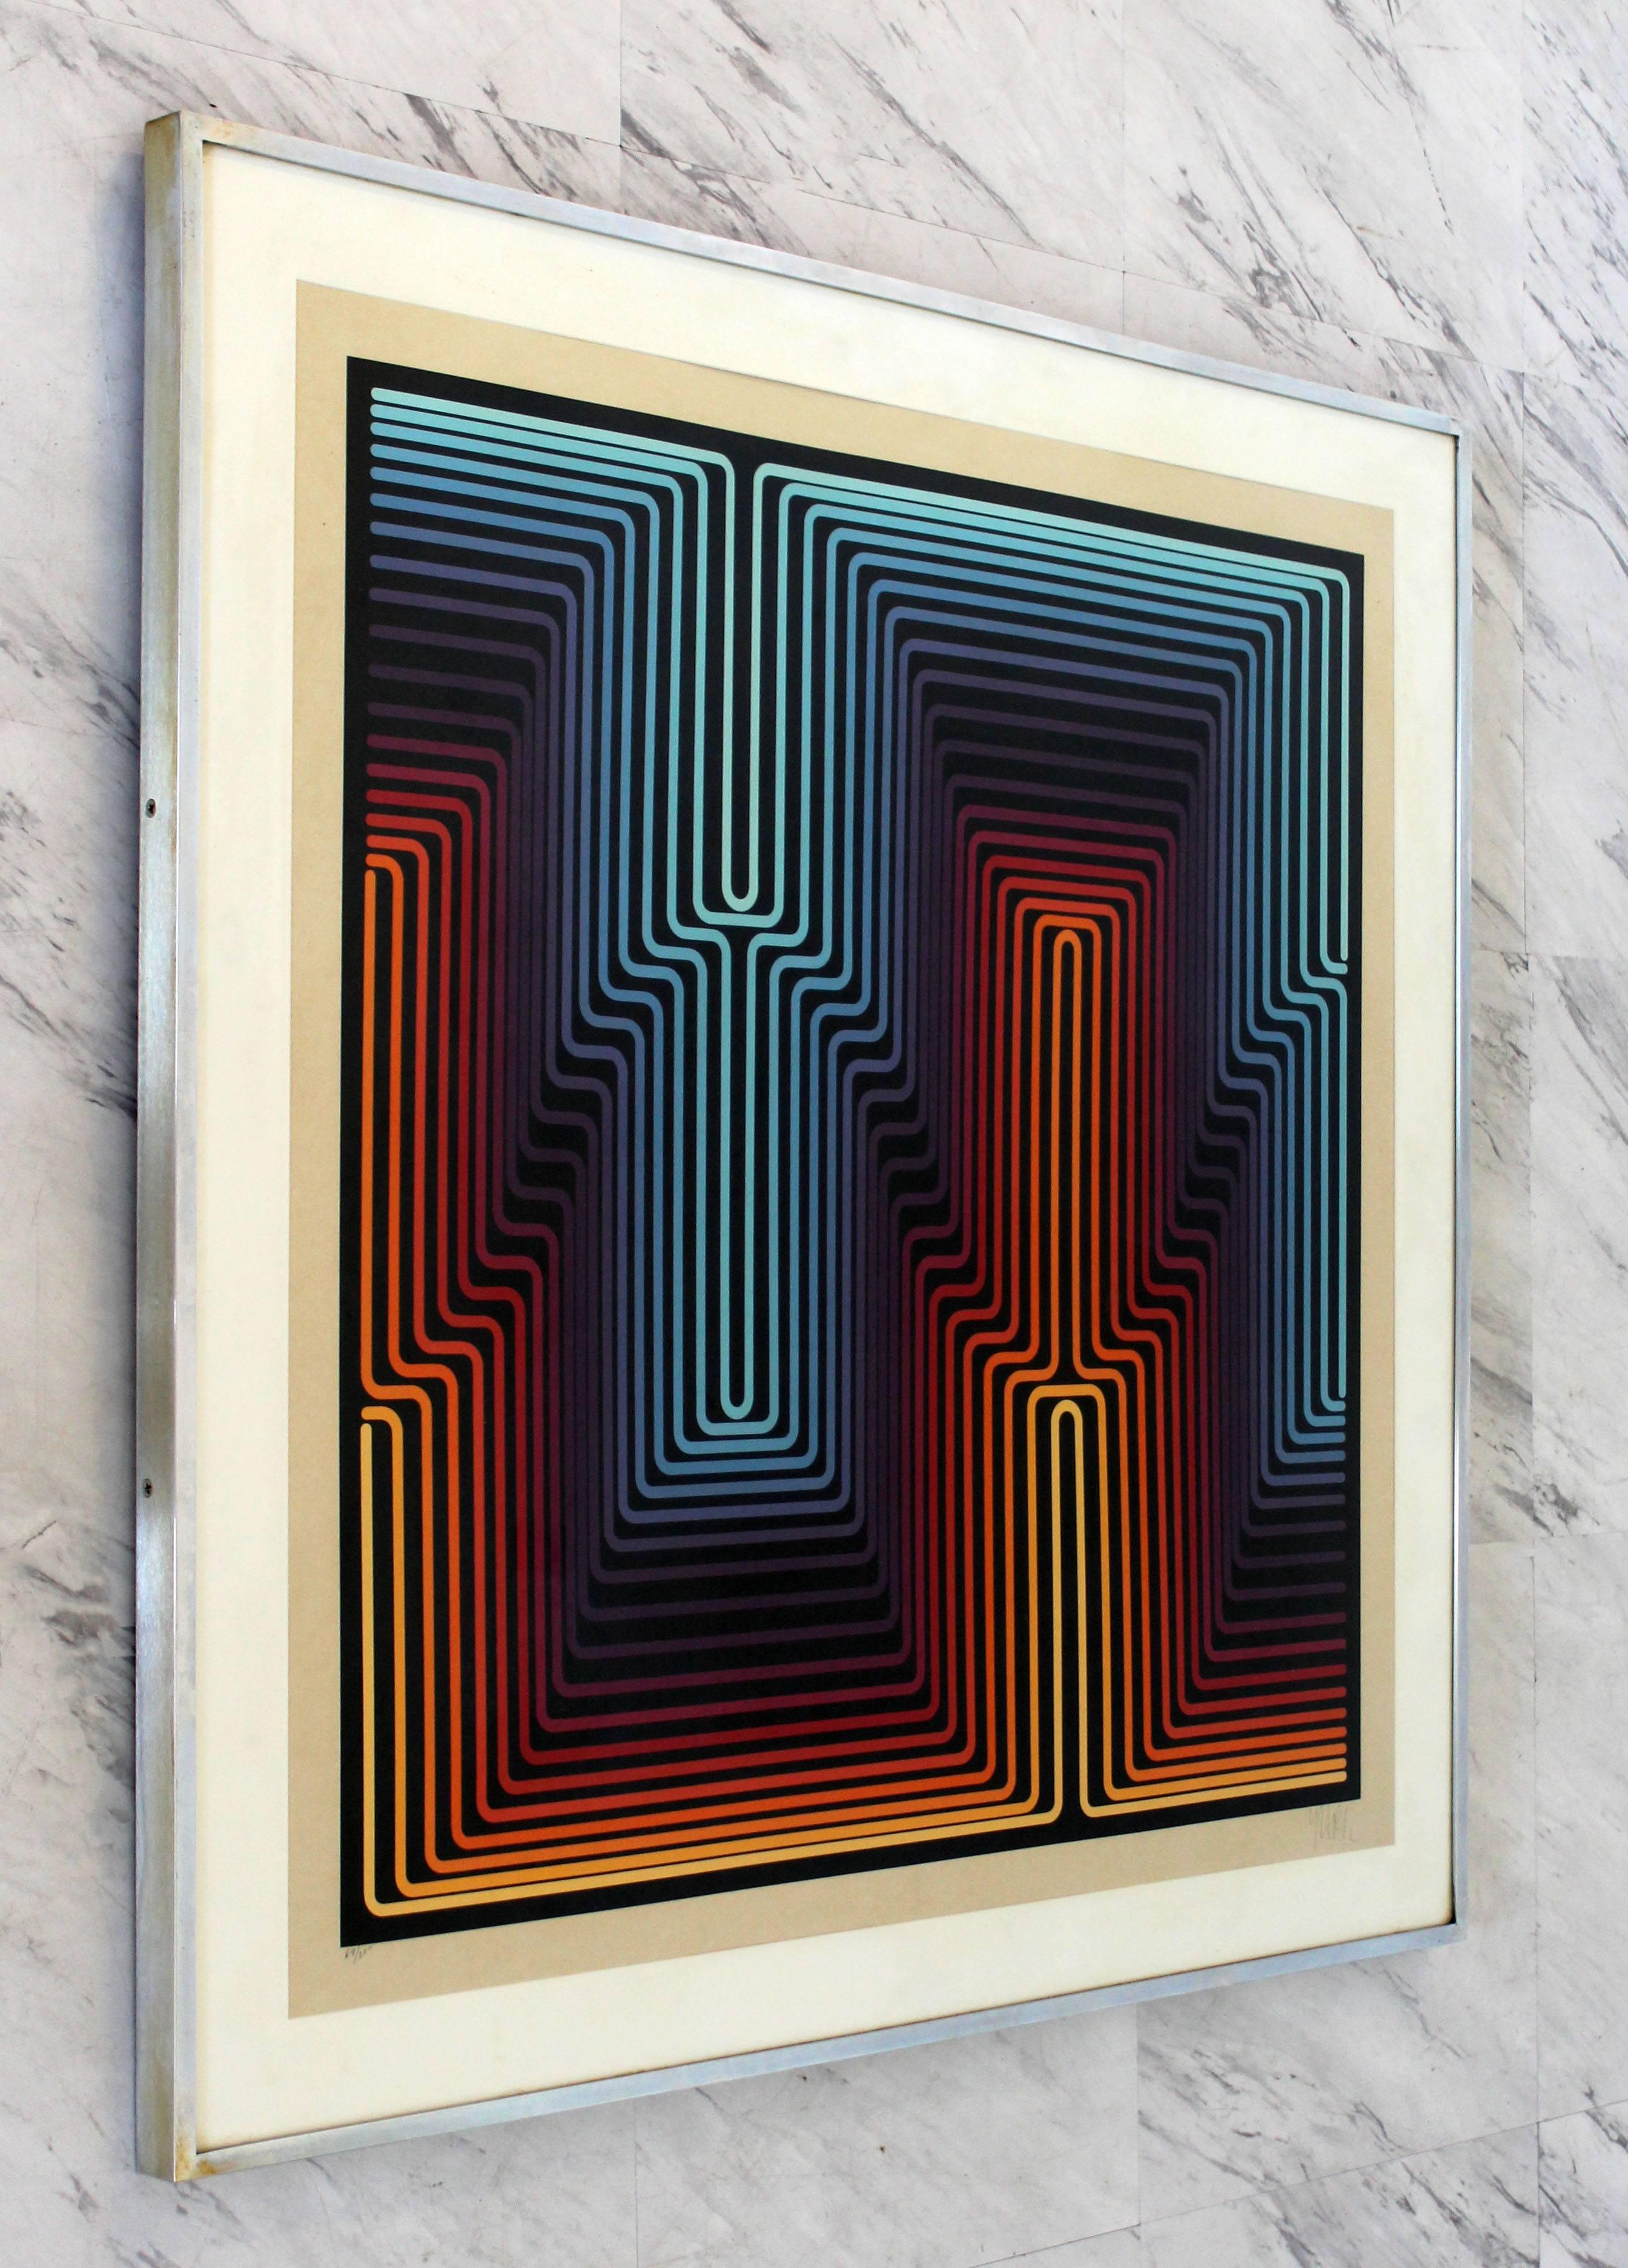 For your consideration is a crazy, cool op art print, signed by Victor Vasarely's son Jean-Pierre, Yvaral and numbered 69/200. In excellent condition. The dimensions are 30